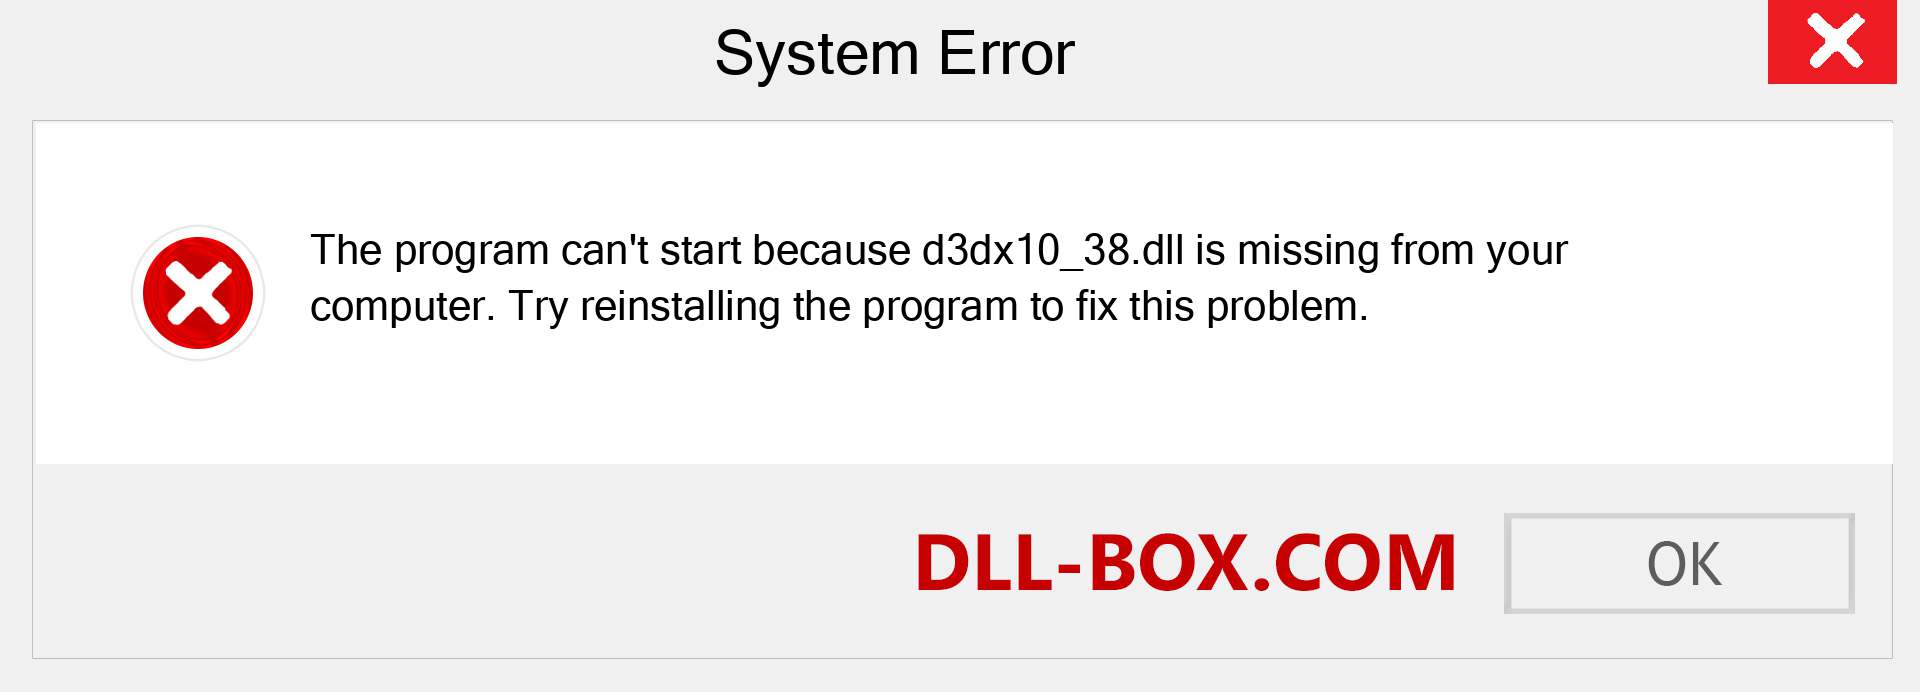  d3dx10_38.dll file is missing?. Download for Windows 7, 8, 10 - Fix  d3dx10_38 dll Missing Error on Windows, photos, images